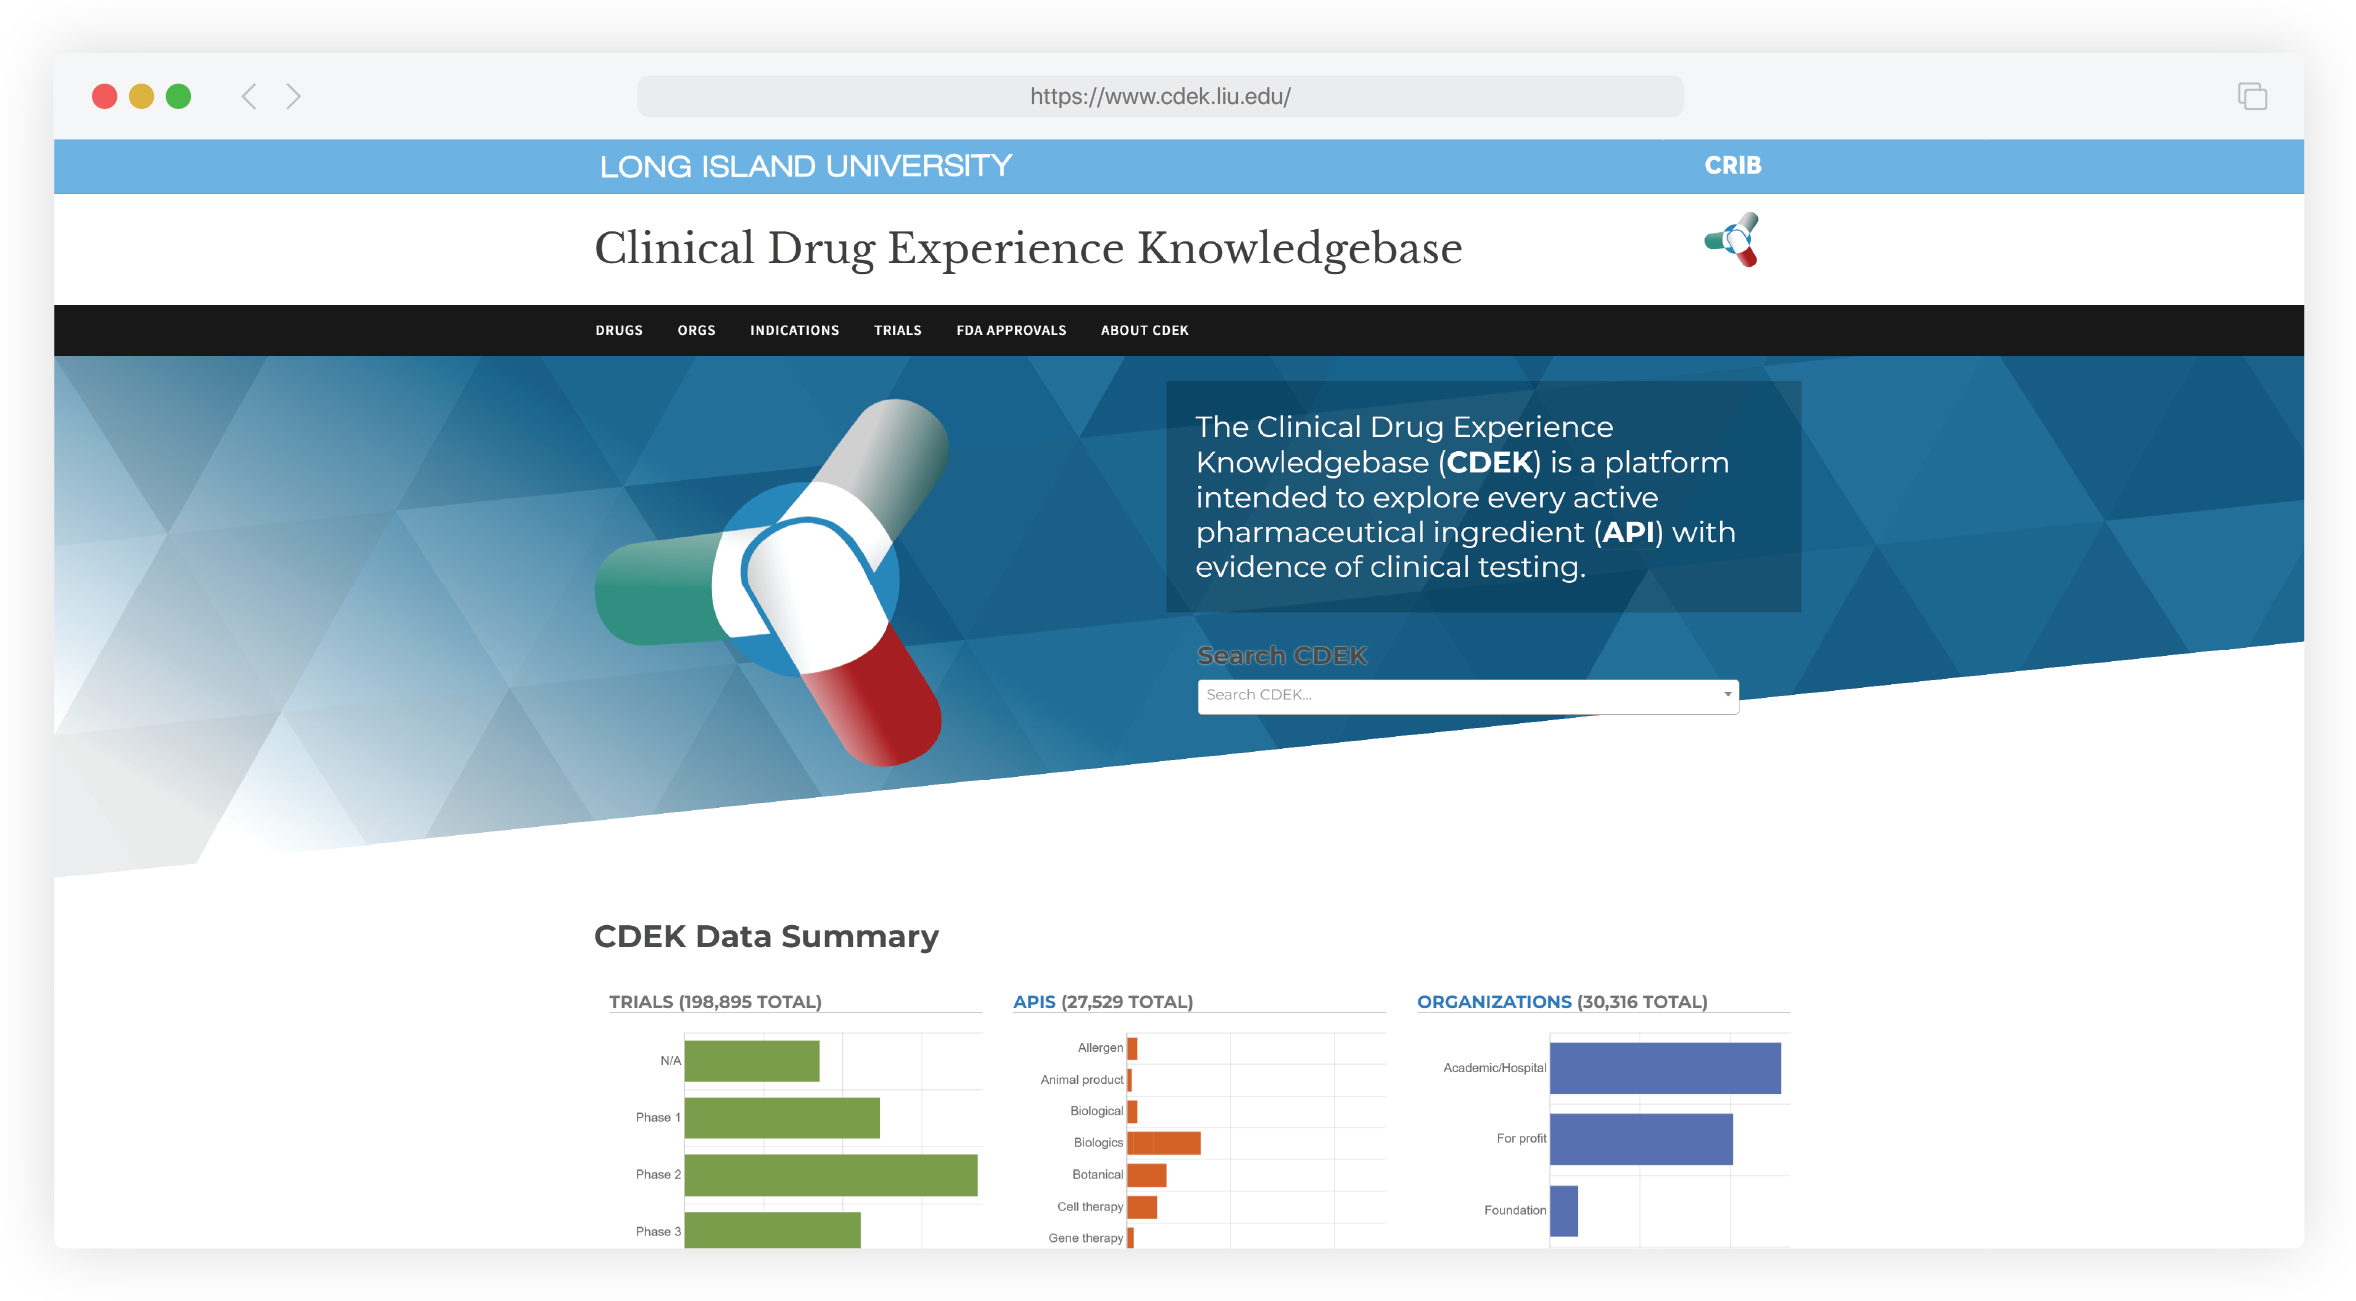 Screenshot of Clinical Drug Experience Knowledgebase website